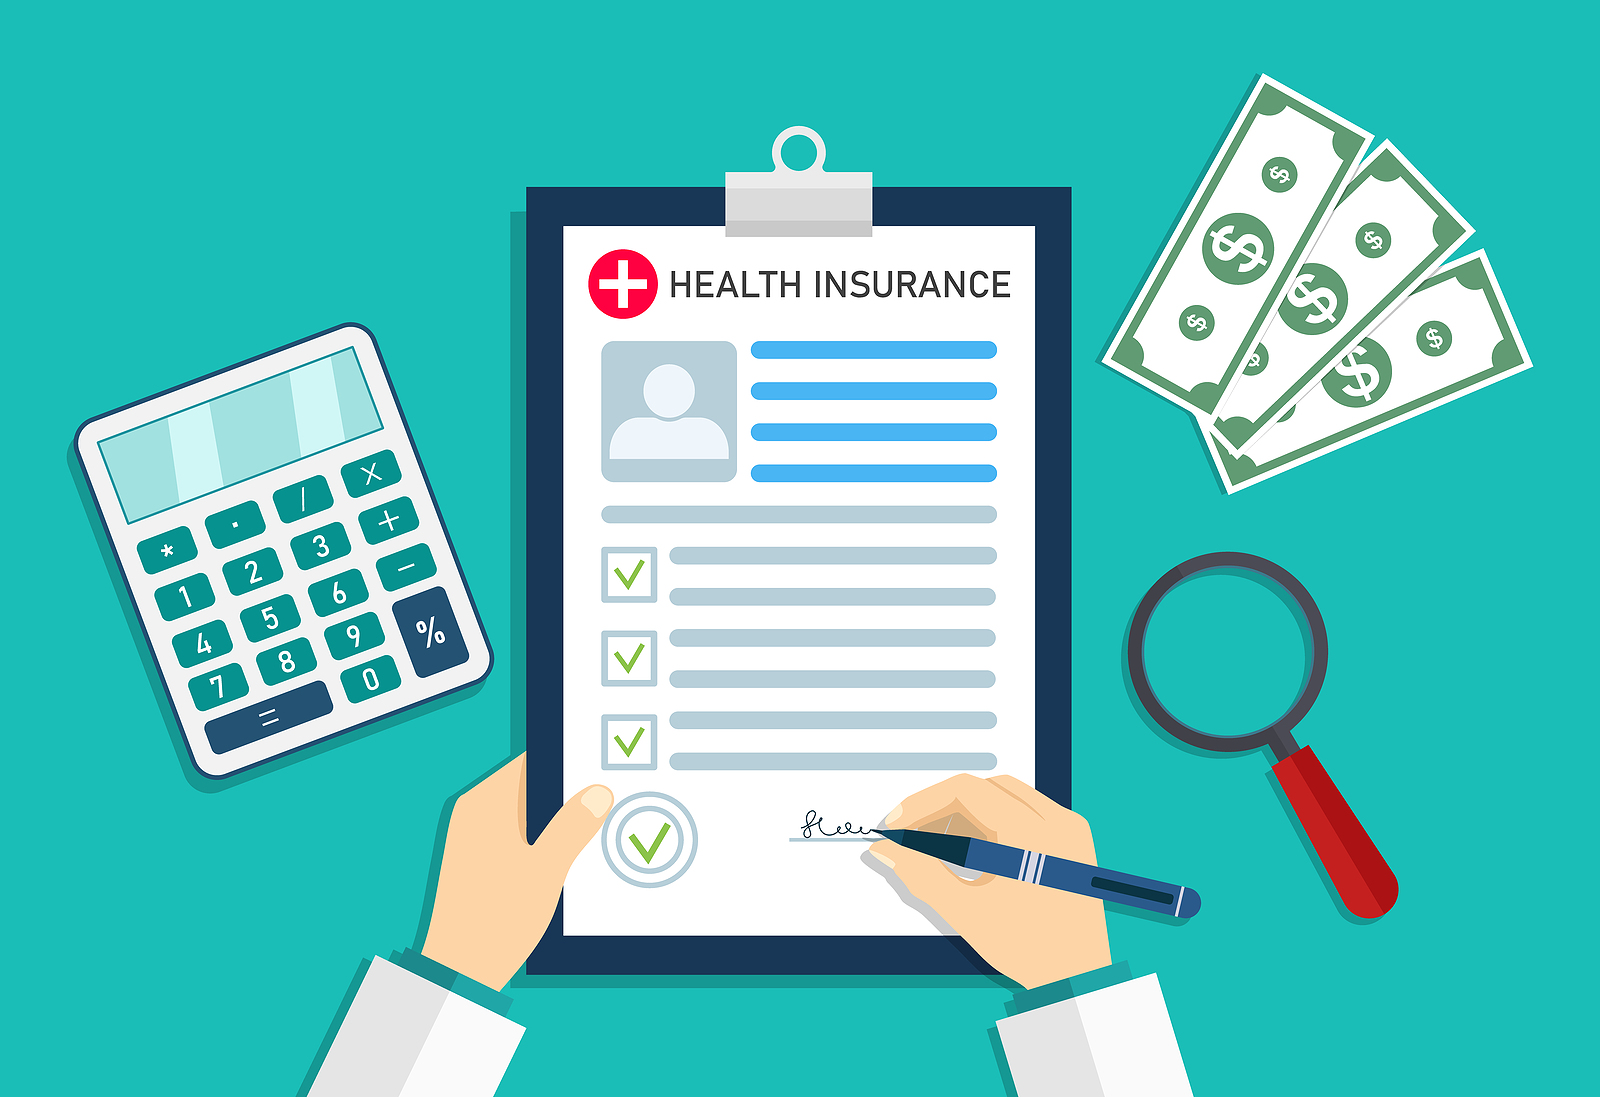 Surprise Medical Billing—What You Need to Know About the Prudent Lay Person Standard